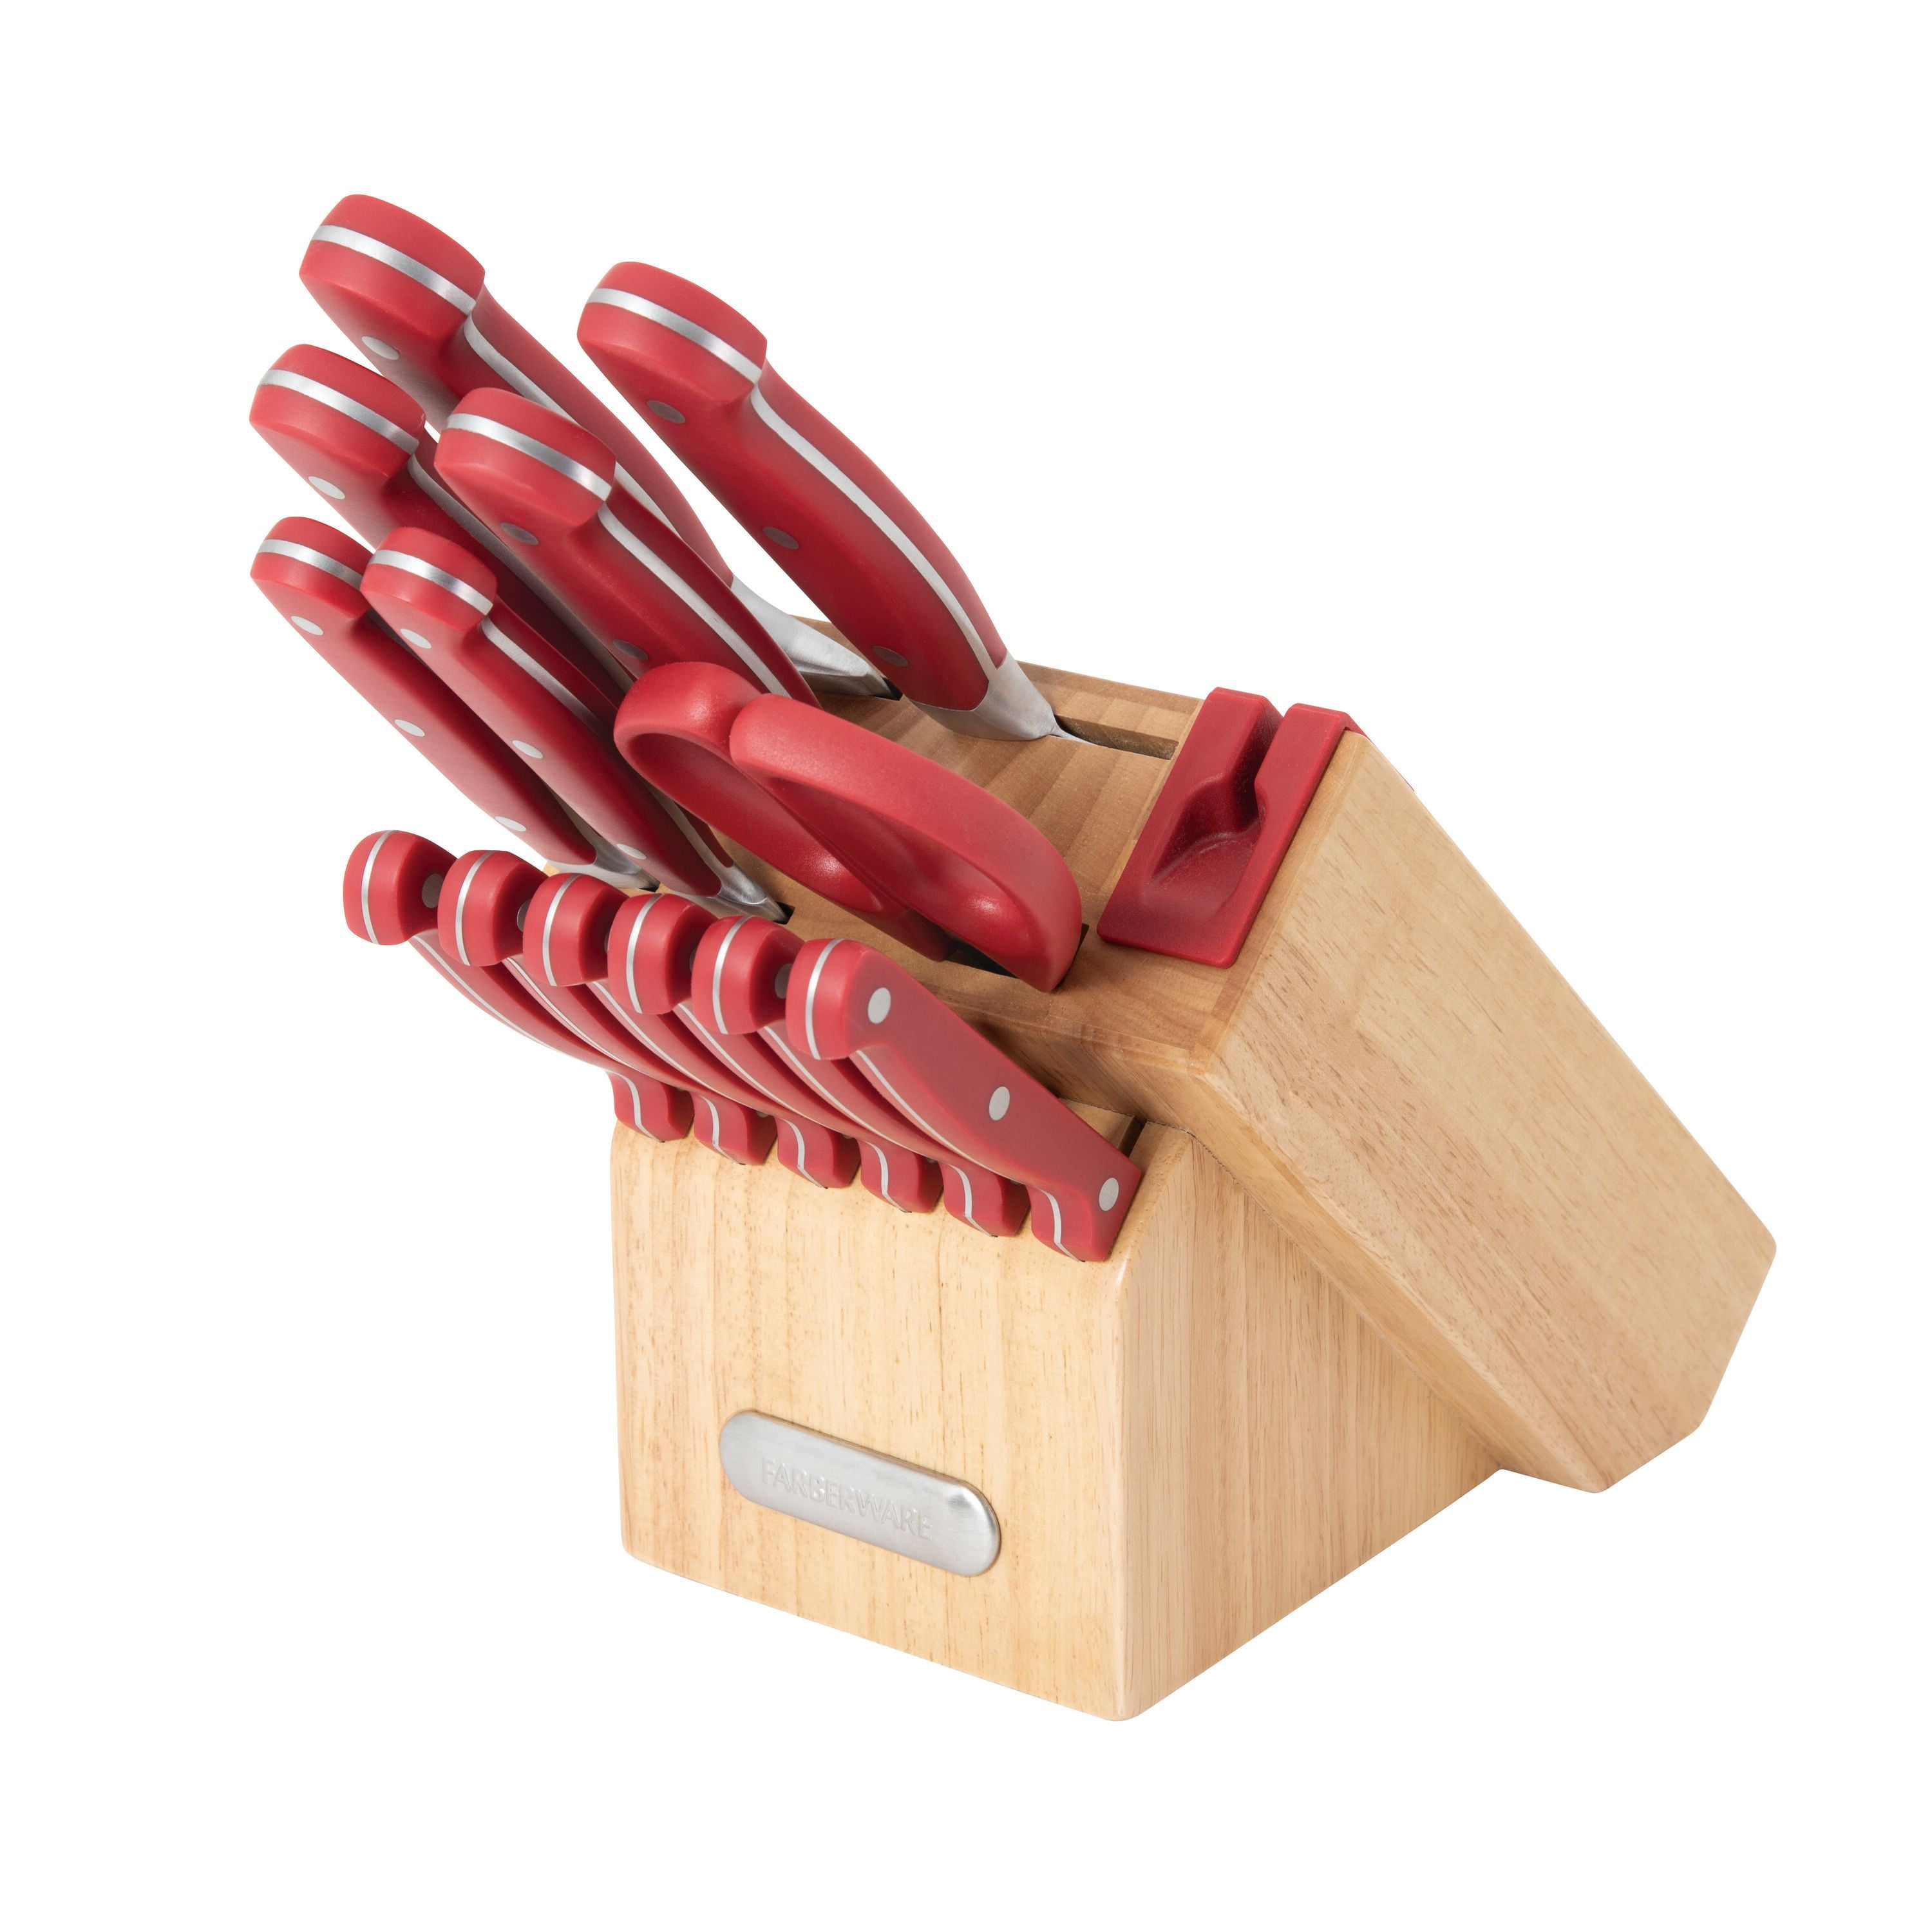 Farberware 8 pieces Stamped Triple Riveted Kitchen Knife Set Red Handles  20L103